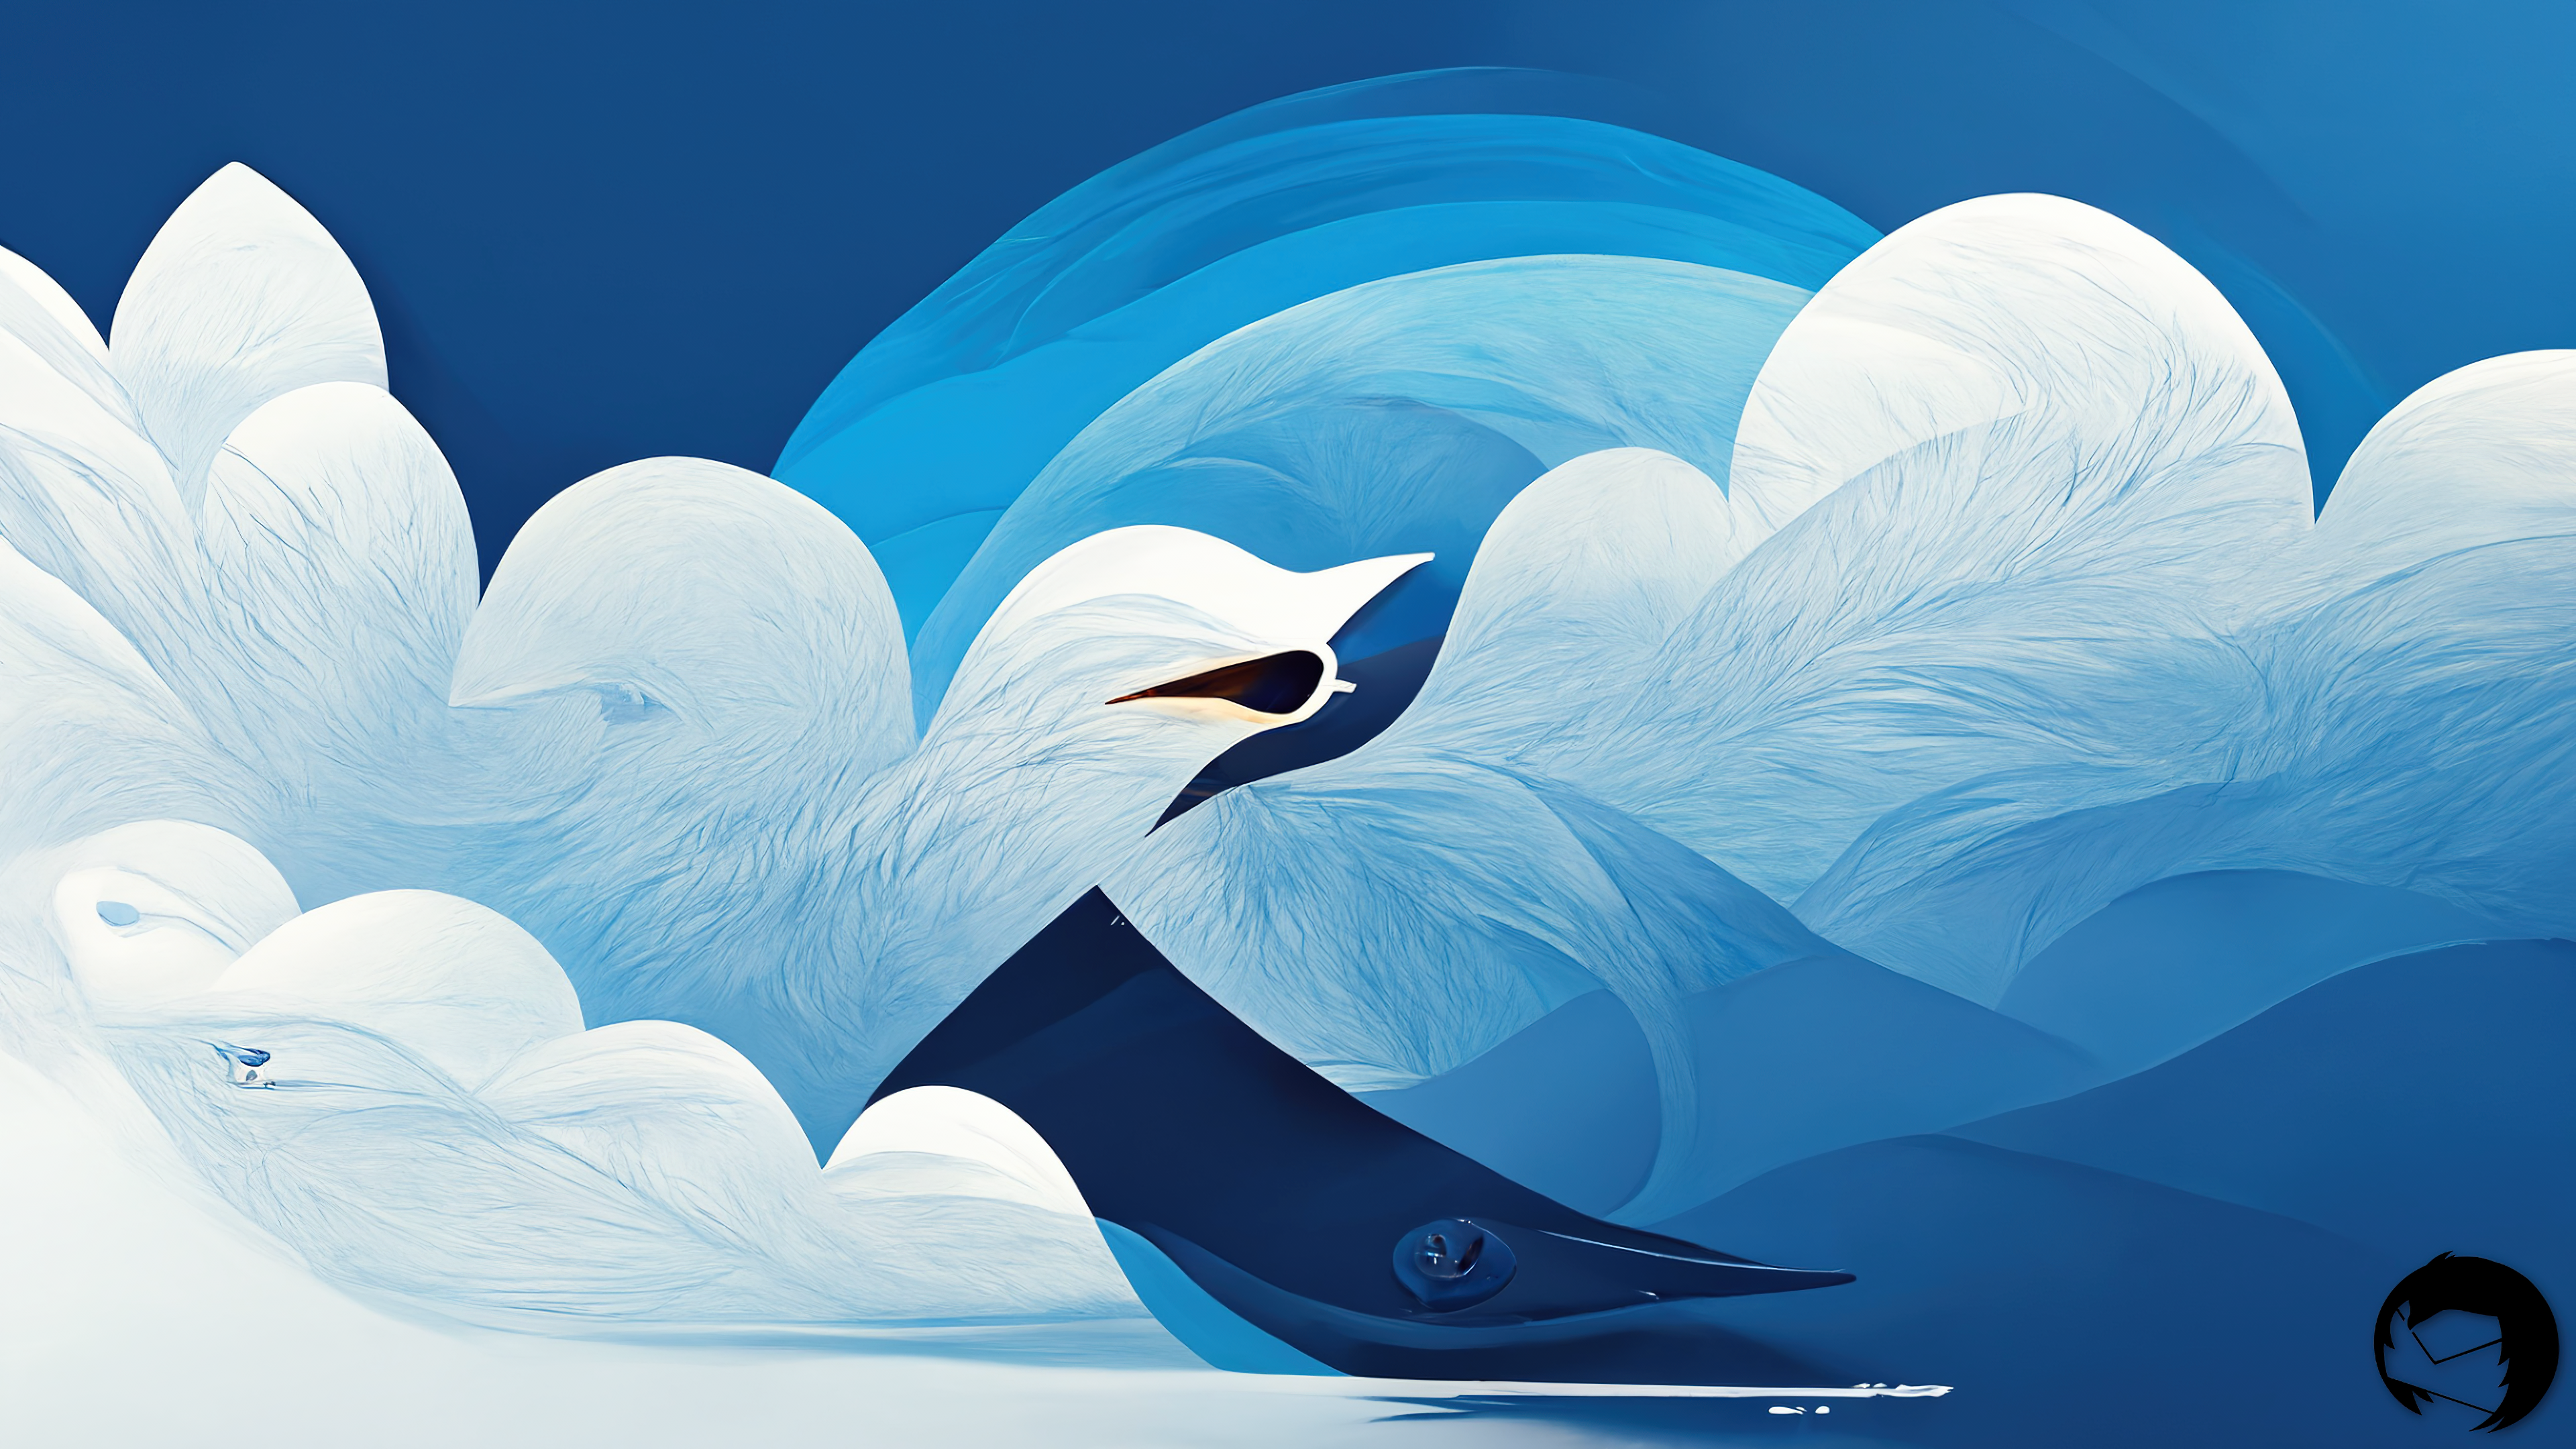 We Asked AI To Create These Beautiful Thunderbird Wallpaper